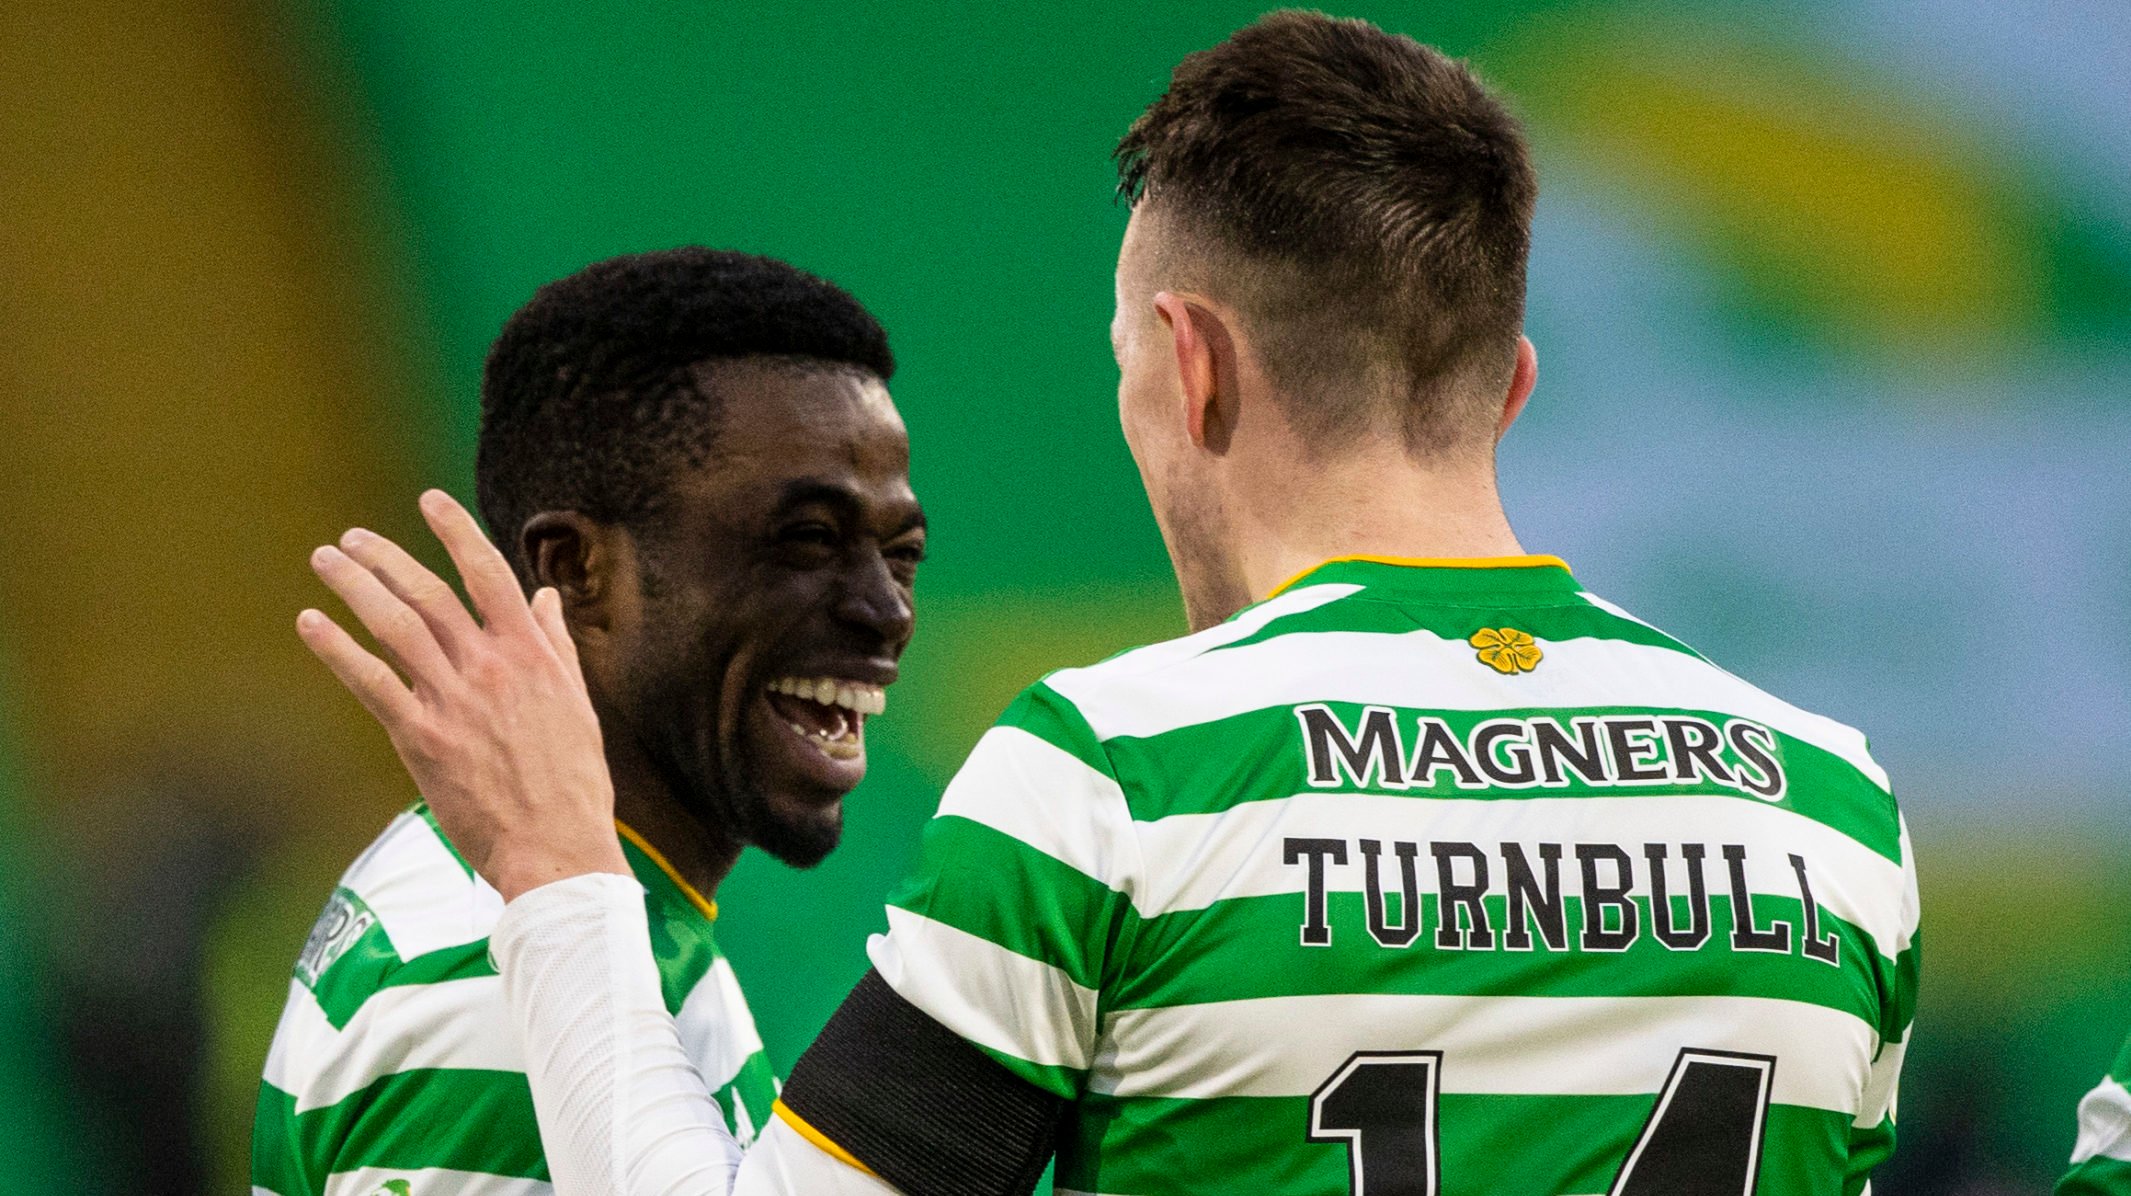 "I love him"; Celtic fans express adulation for Ismaila Soro after in-house interview